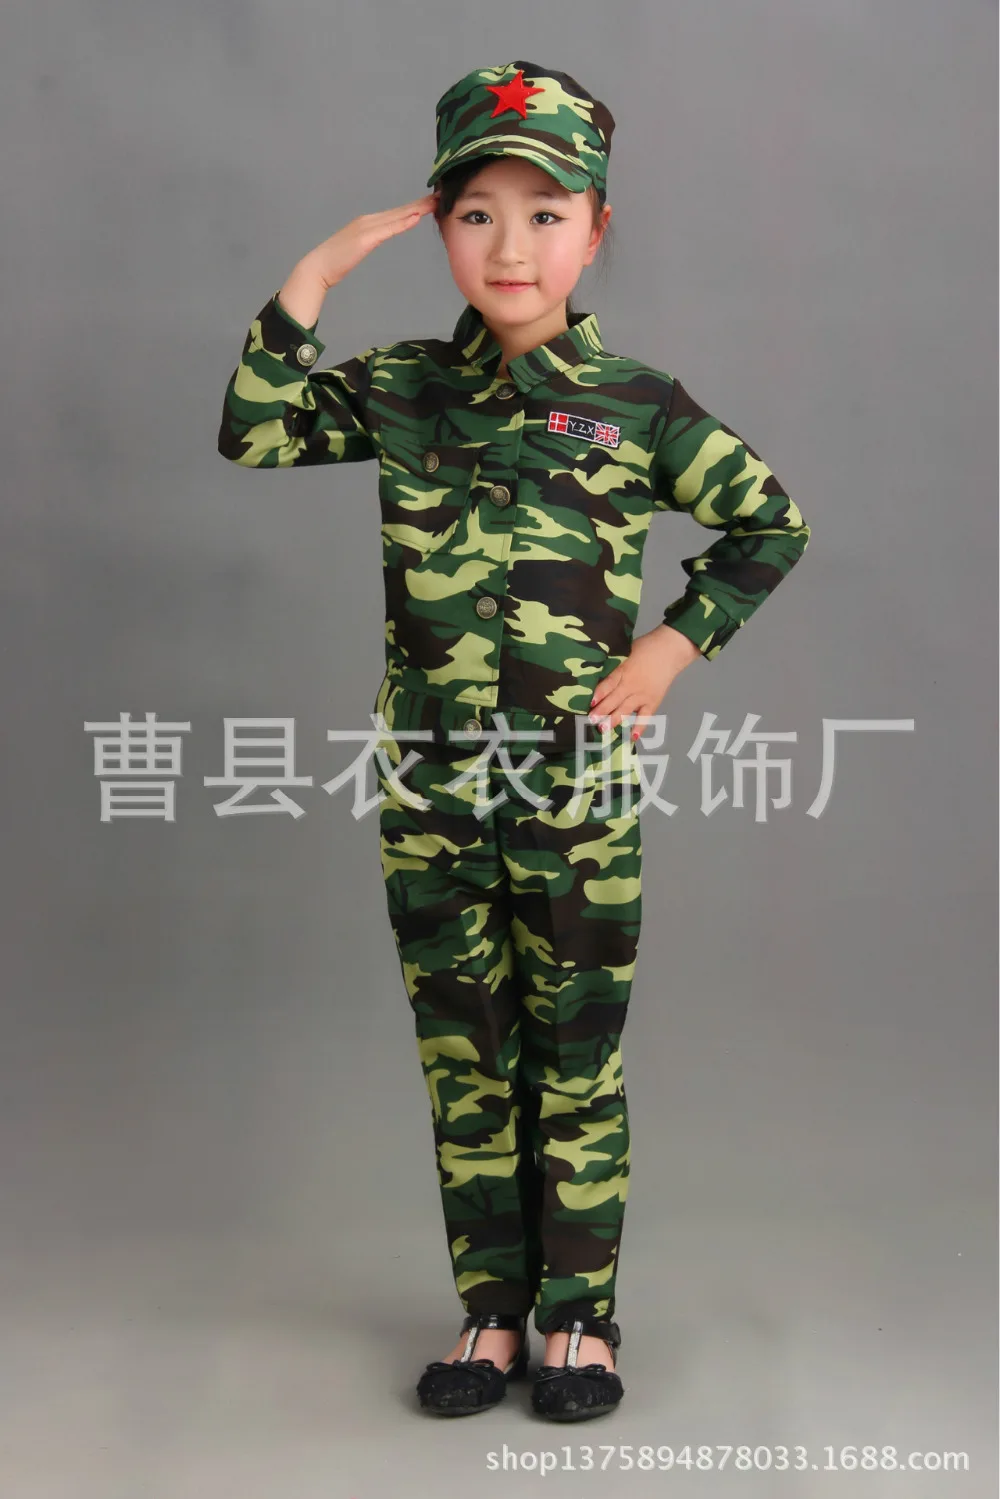 Children Camouflage Boy Costume Army Force  Book Week  Fancy Dress 4-9 Years 